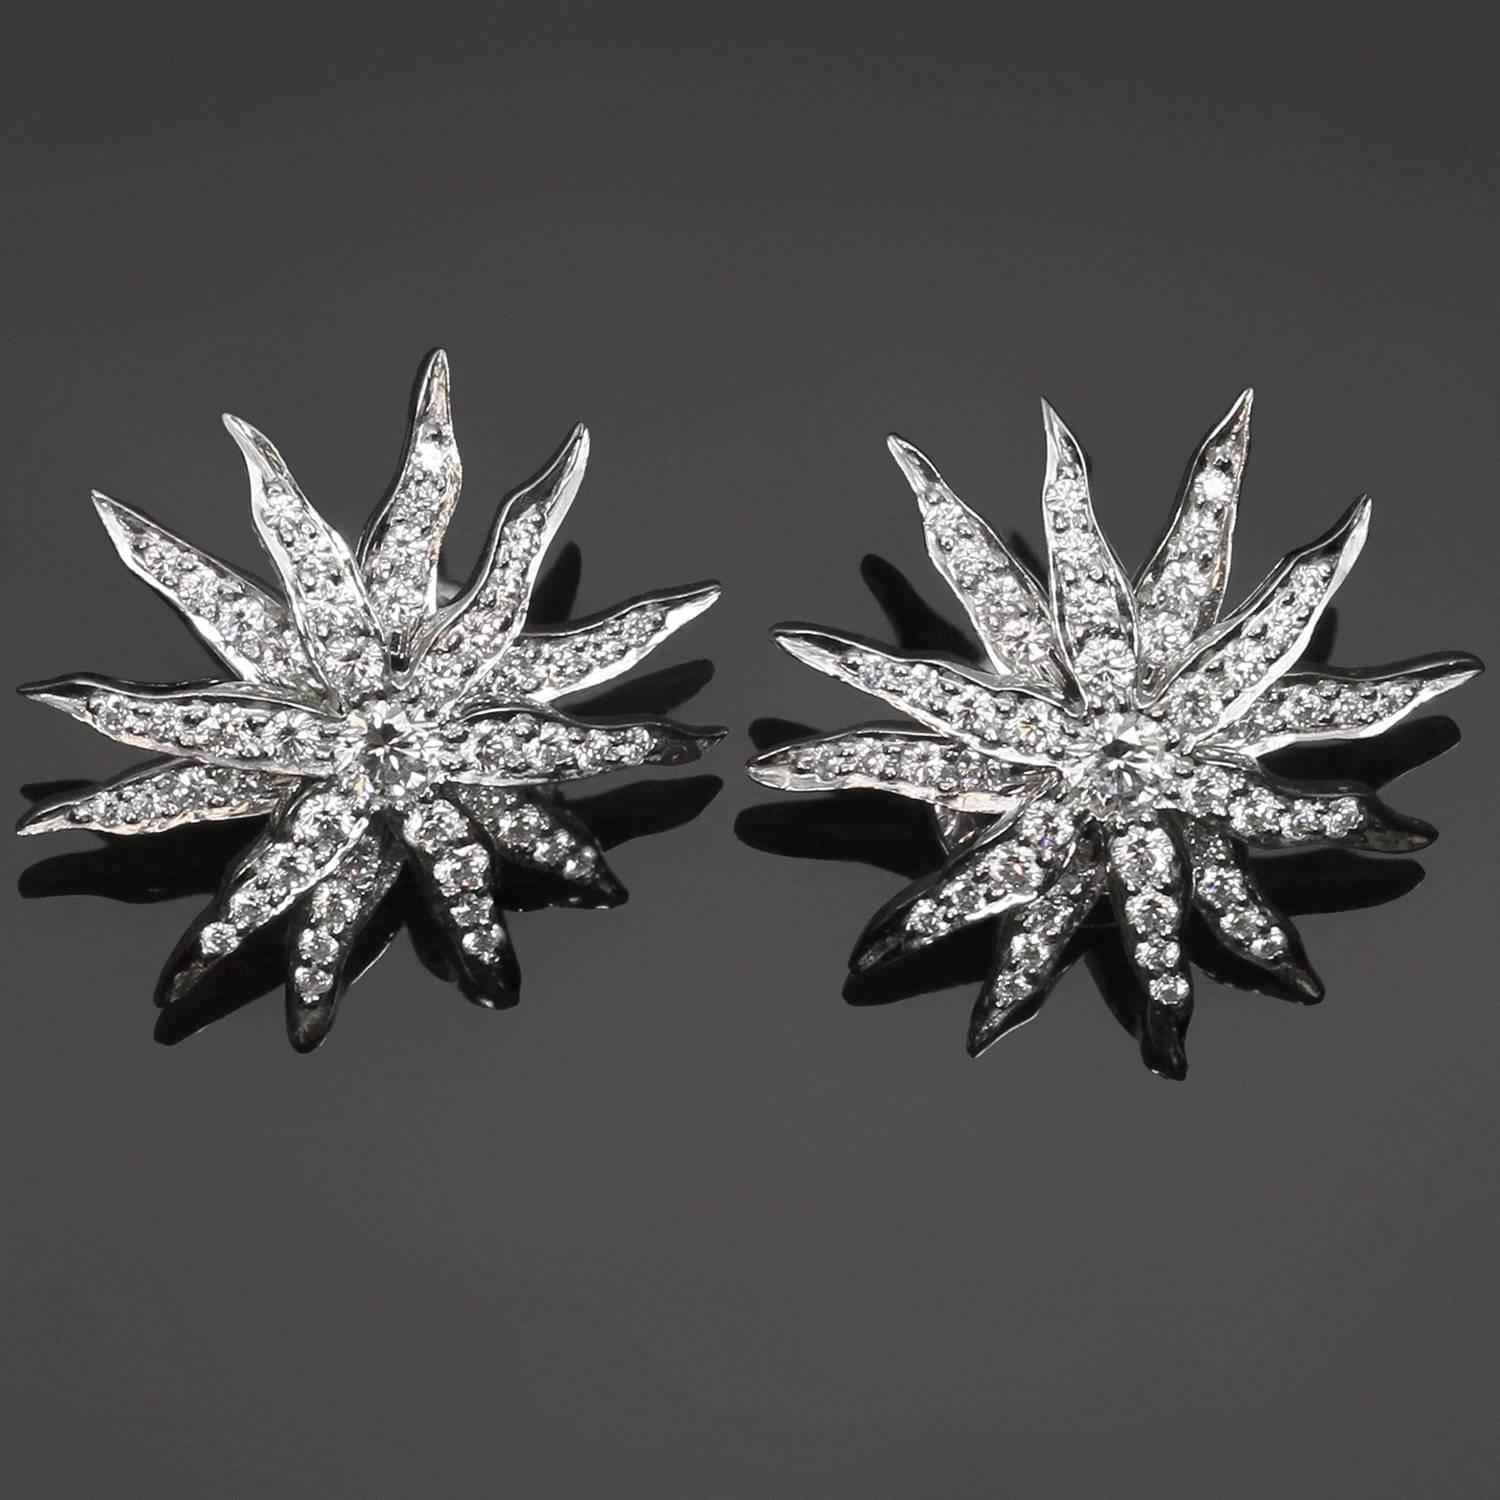 These fabulous Tiffany clip-on earrings feature a stunning lace sunburst design crafted in platinum and pave-set with sparkling brilliant-cut round diamonds of an estimated 1.0 carat. Posts for pierced ears can be added upon request. Made in United